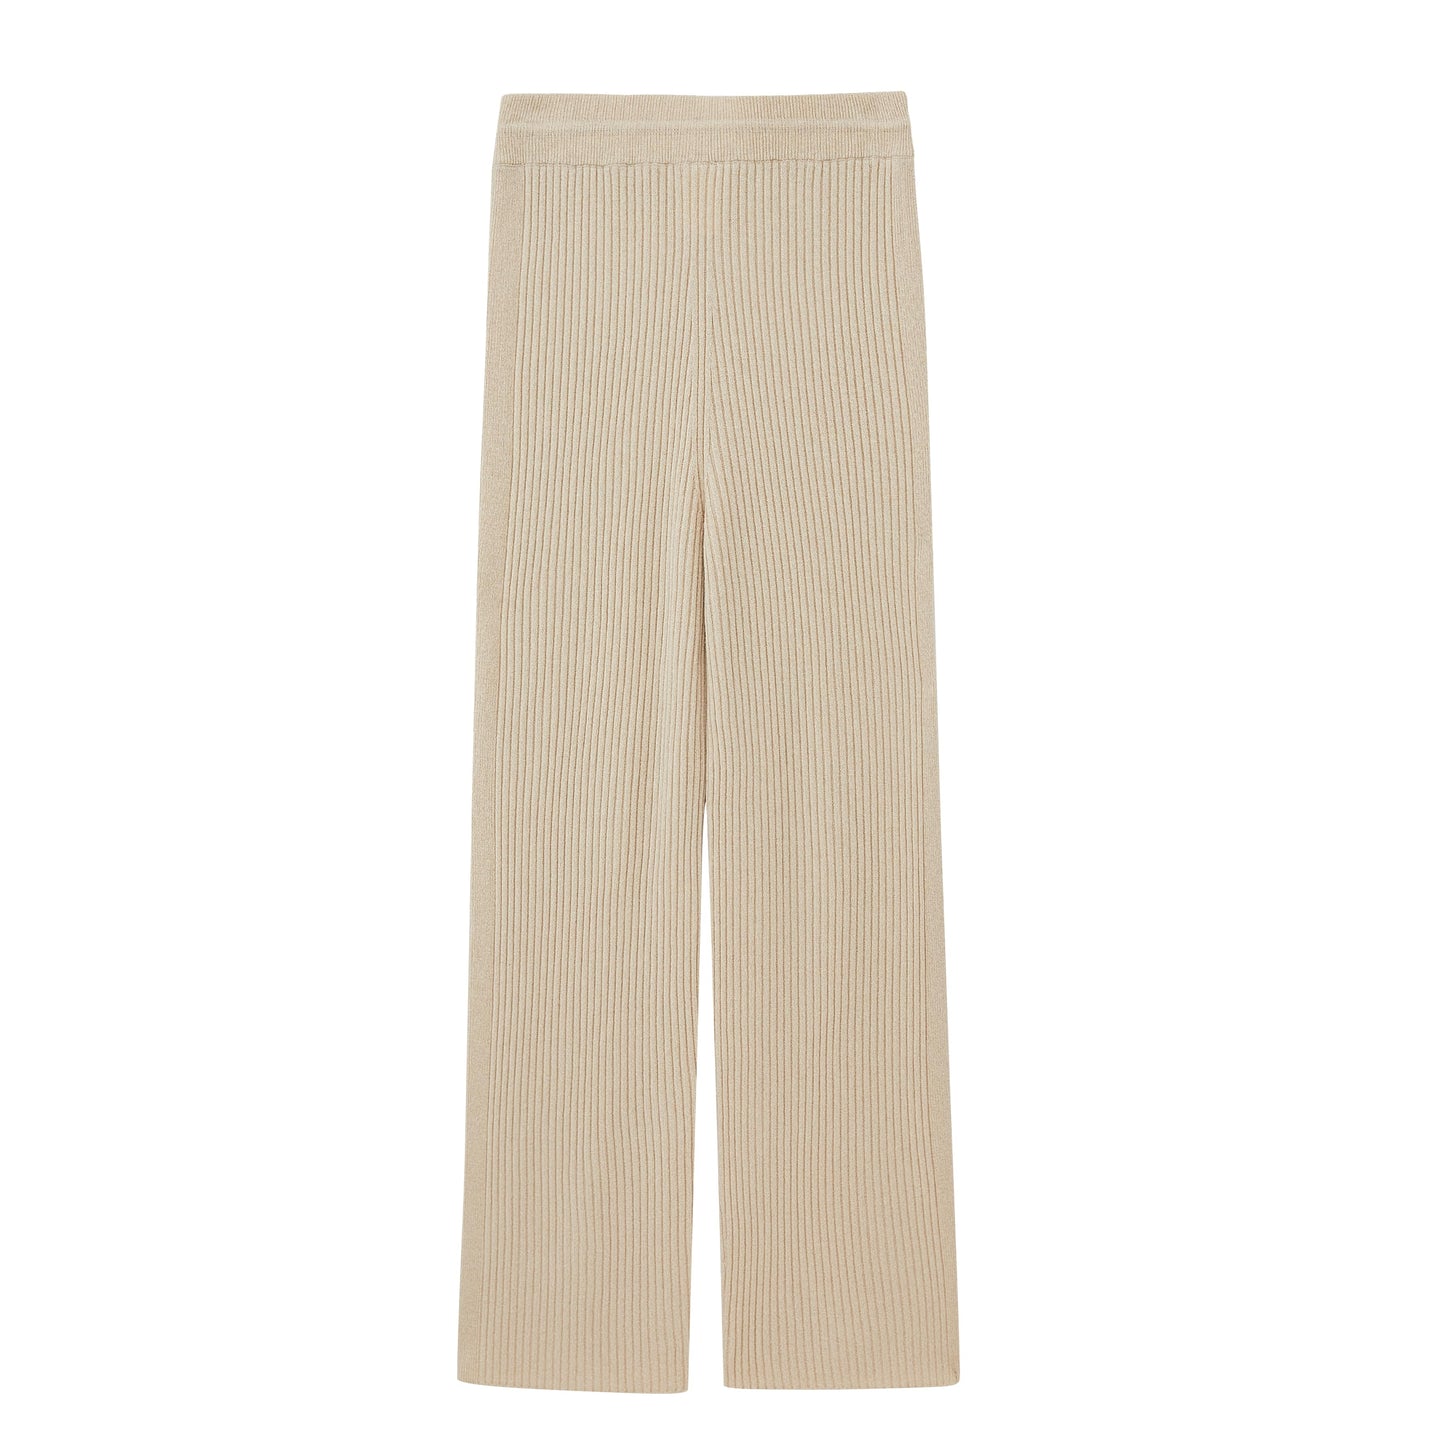 ivory flare knitted pants back flat lay 